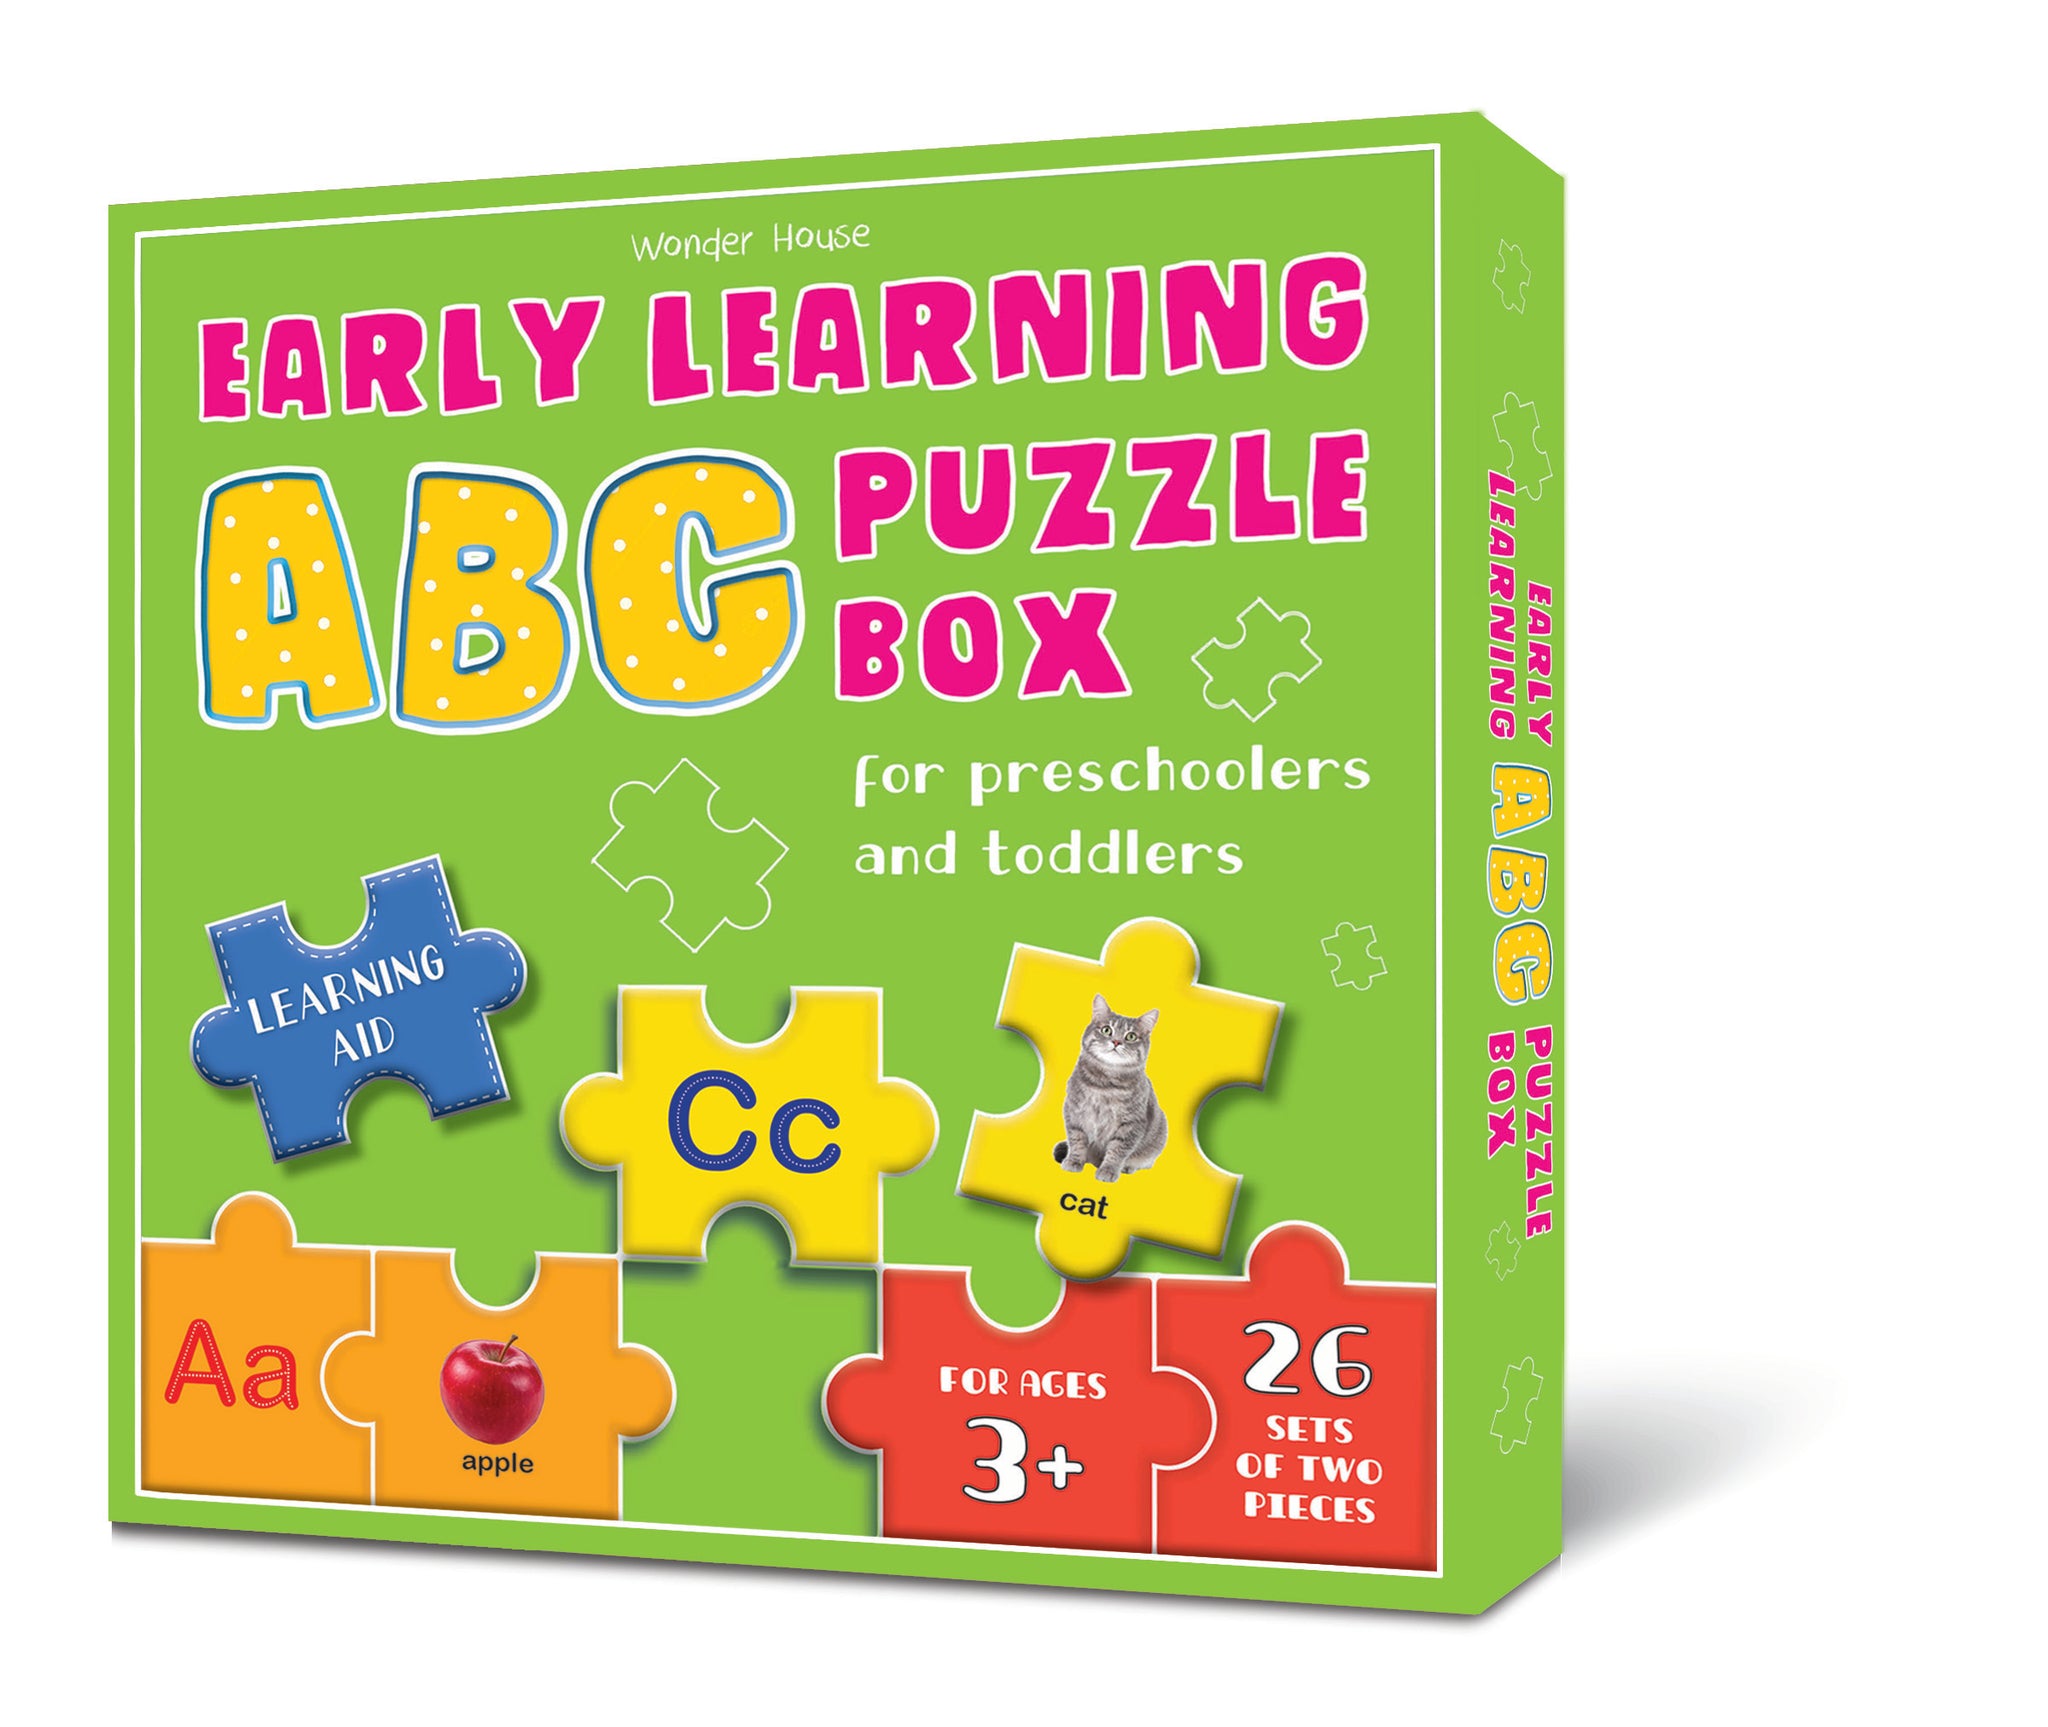 Early Learning ABC Puzzle Box For Preschoolers And Toddlers - Learning Aid & Educational Toy (Jigsaw Puzzle for Kids Age 3 and Above)